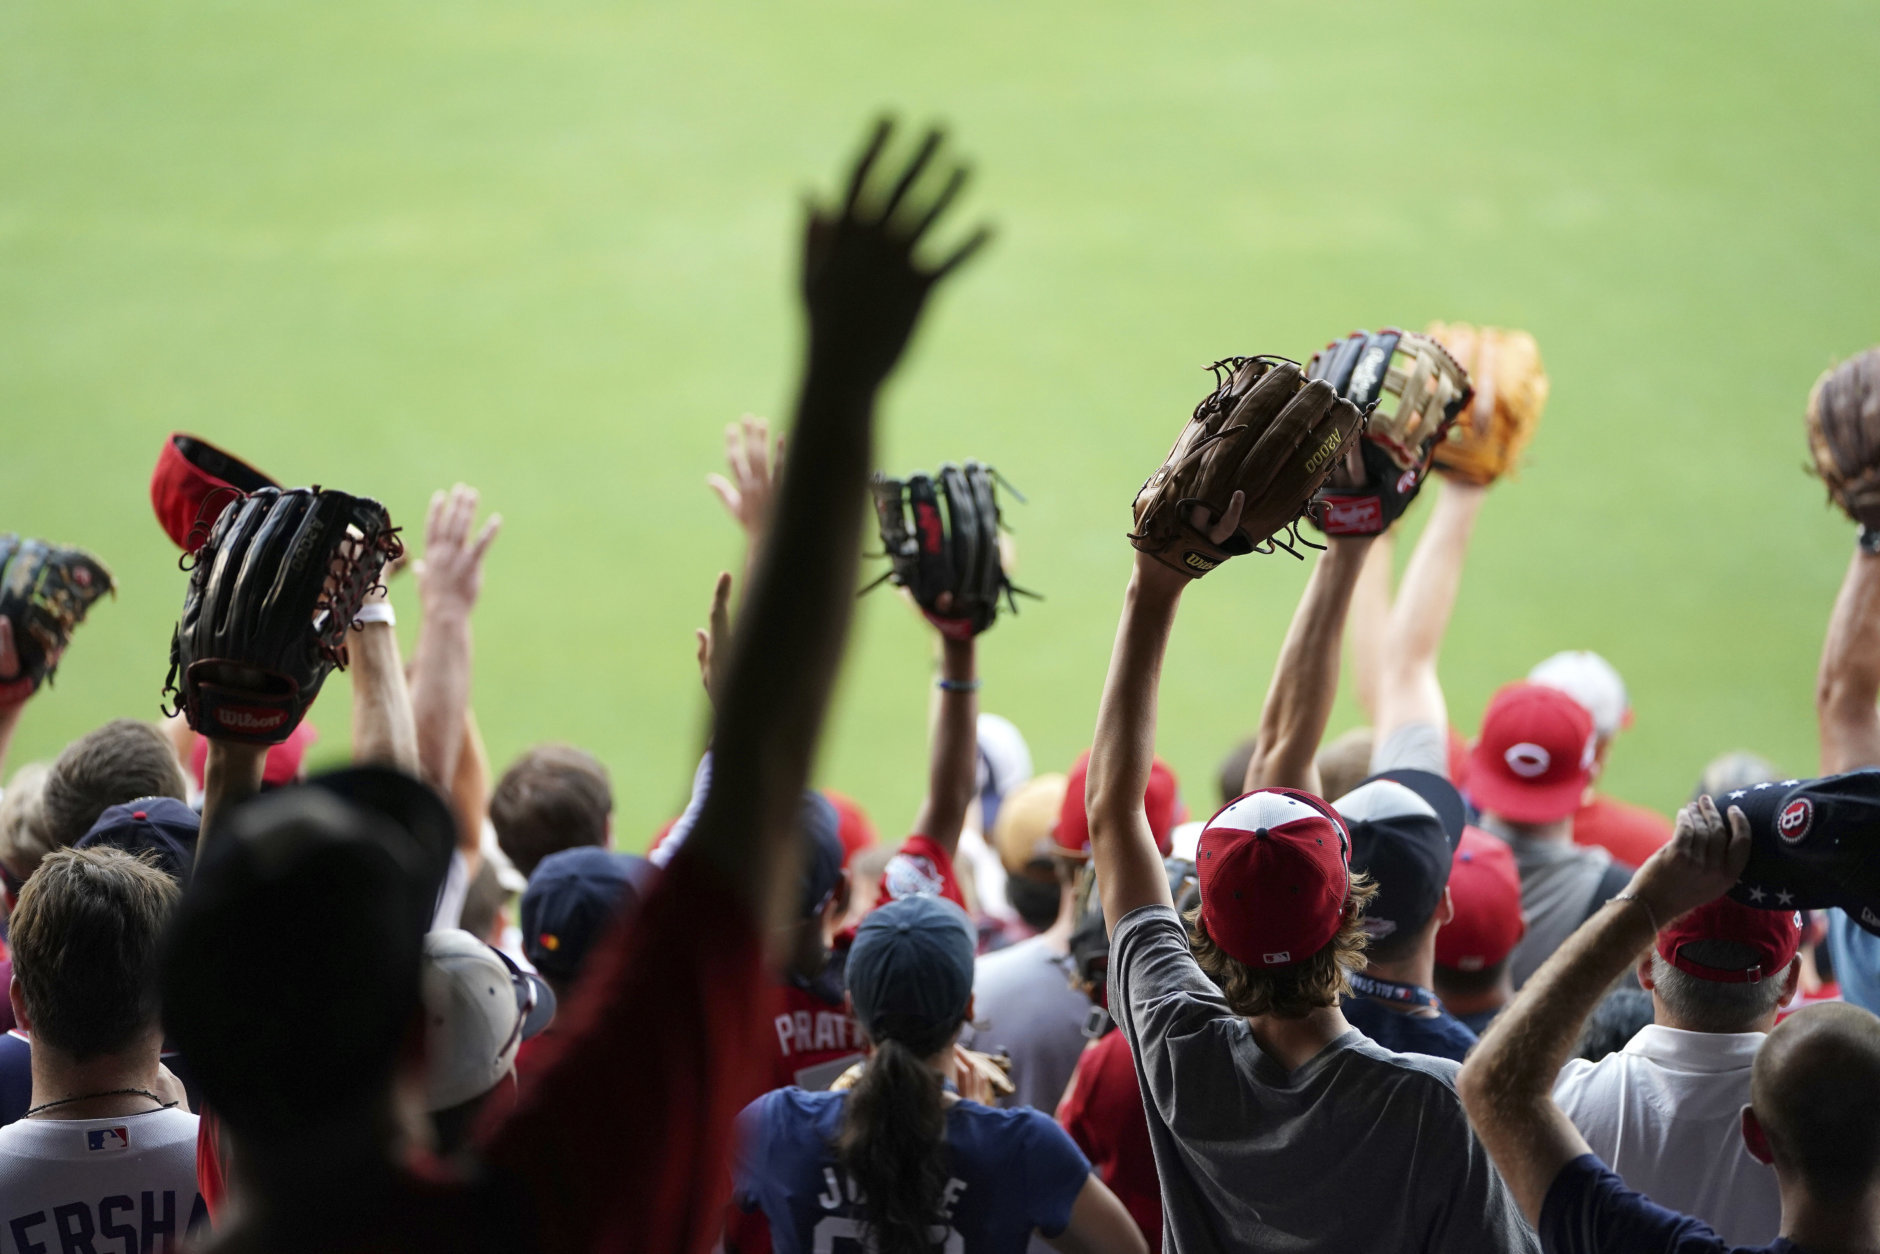 Fans vies for a thrown baseball ahead of the All-Star Home Run Derby Baseball event, Monday, July 16, 2018, at Nationals Park, Washington. The 89th MLB baseball All-Star Game will be played Tuesday. (AP Photo/Carolyn Kaster)